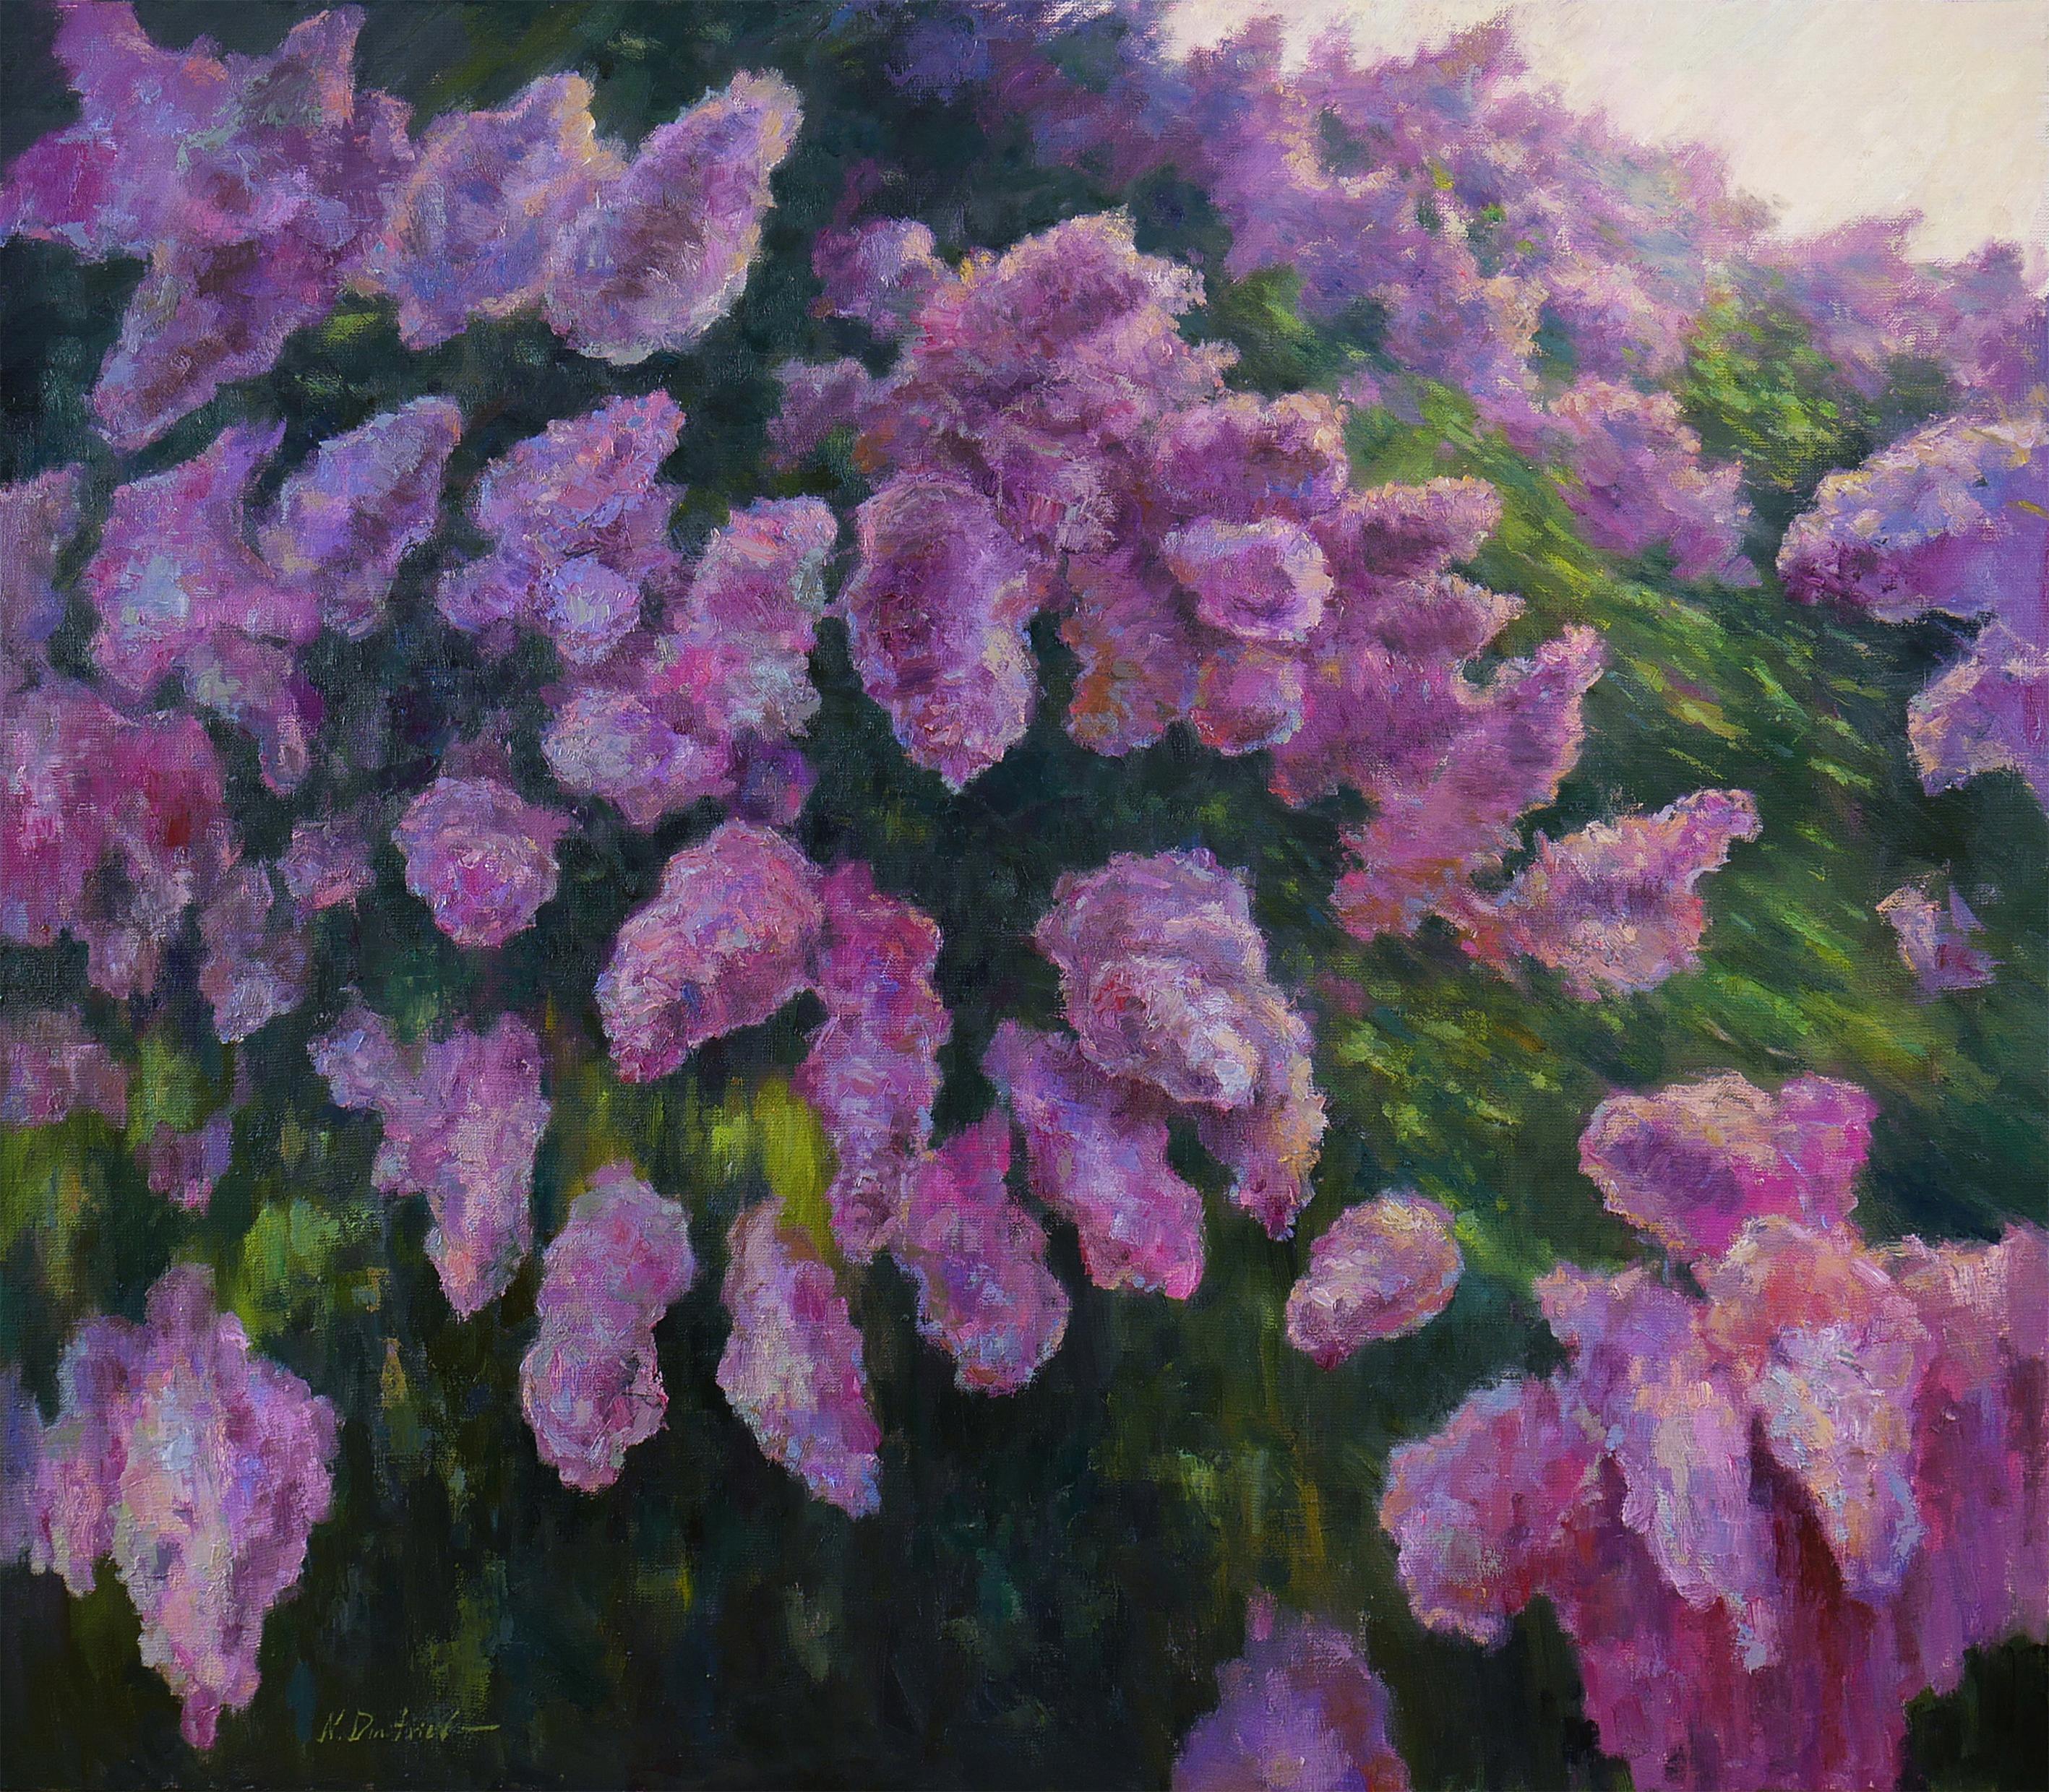 Nikolay Dmitriev Landscape Painting - Lilacs Fading Into Light - sunny floral painting